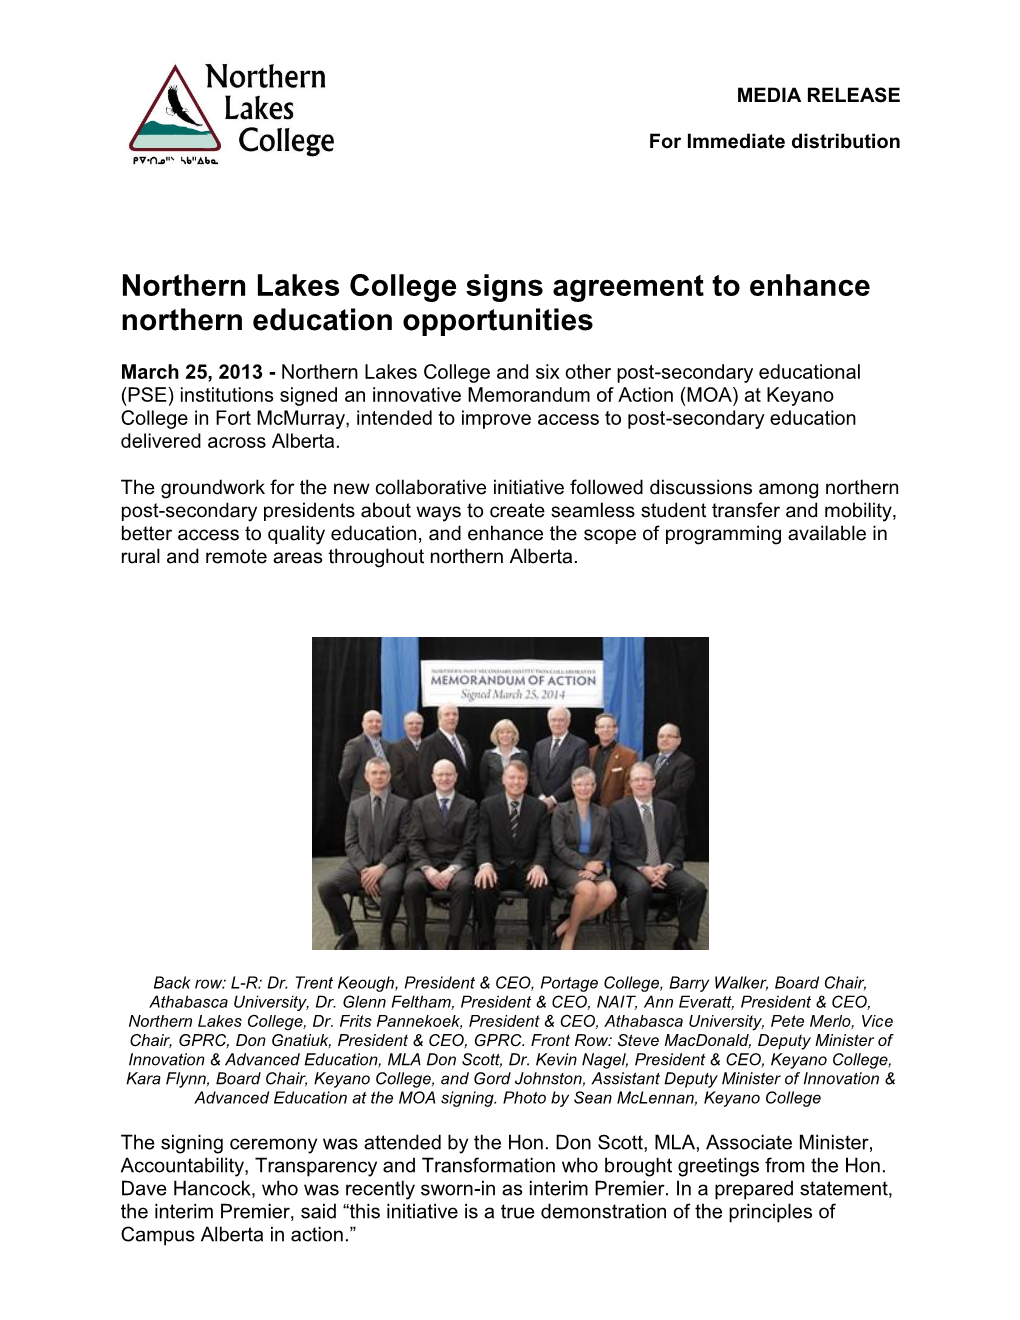 Northern Lakes College Signs Agreement to Enhance Northern Education Opportunities